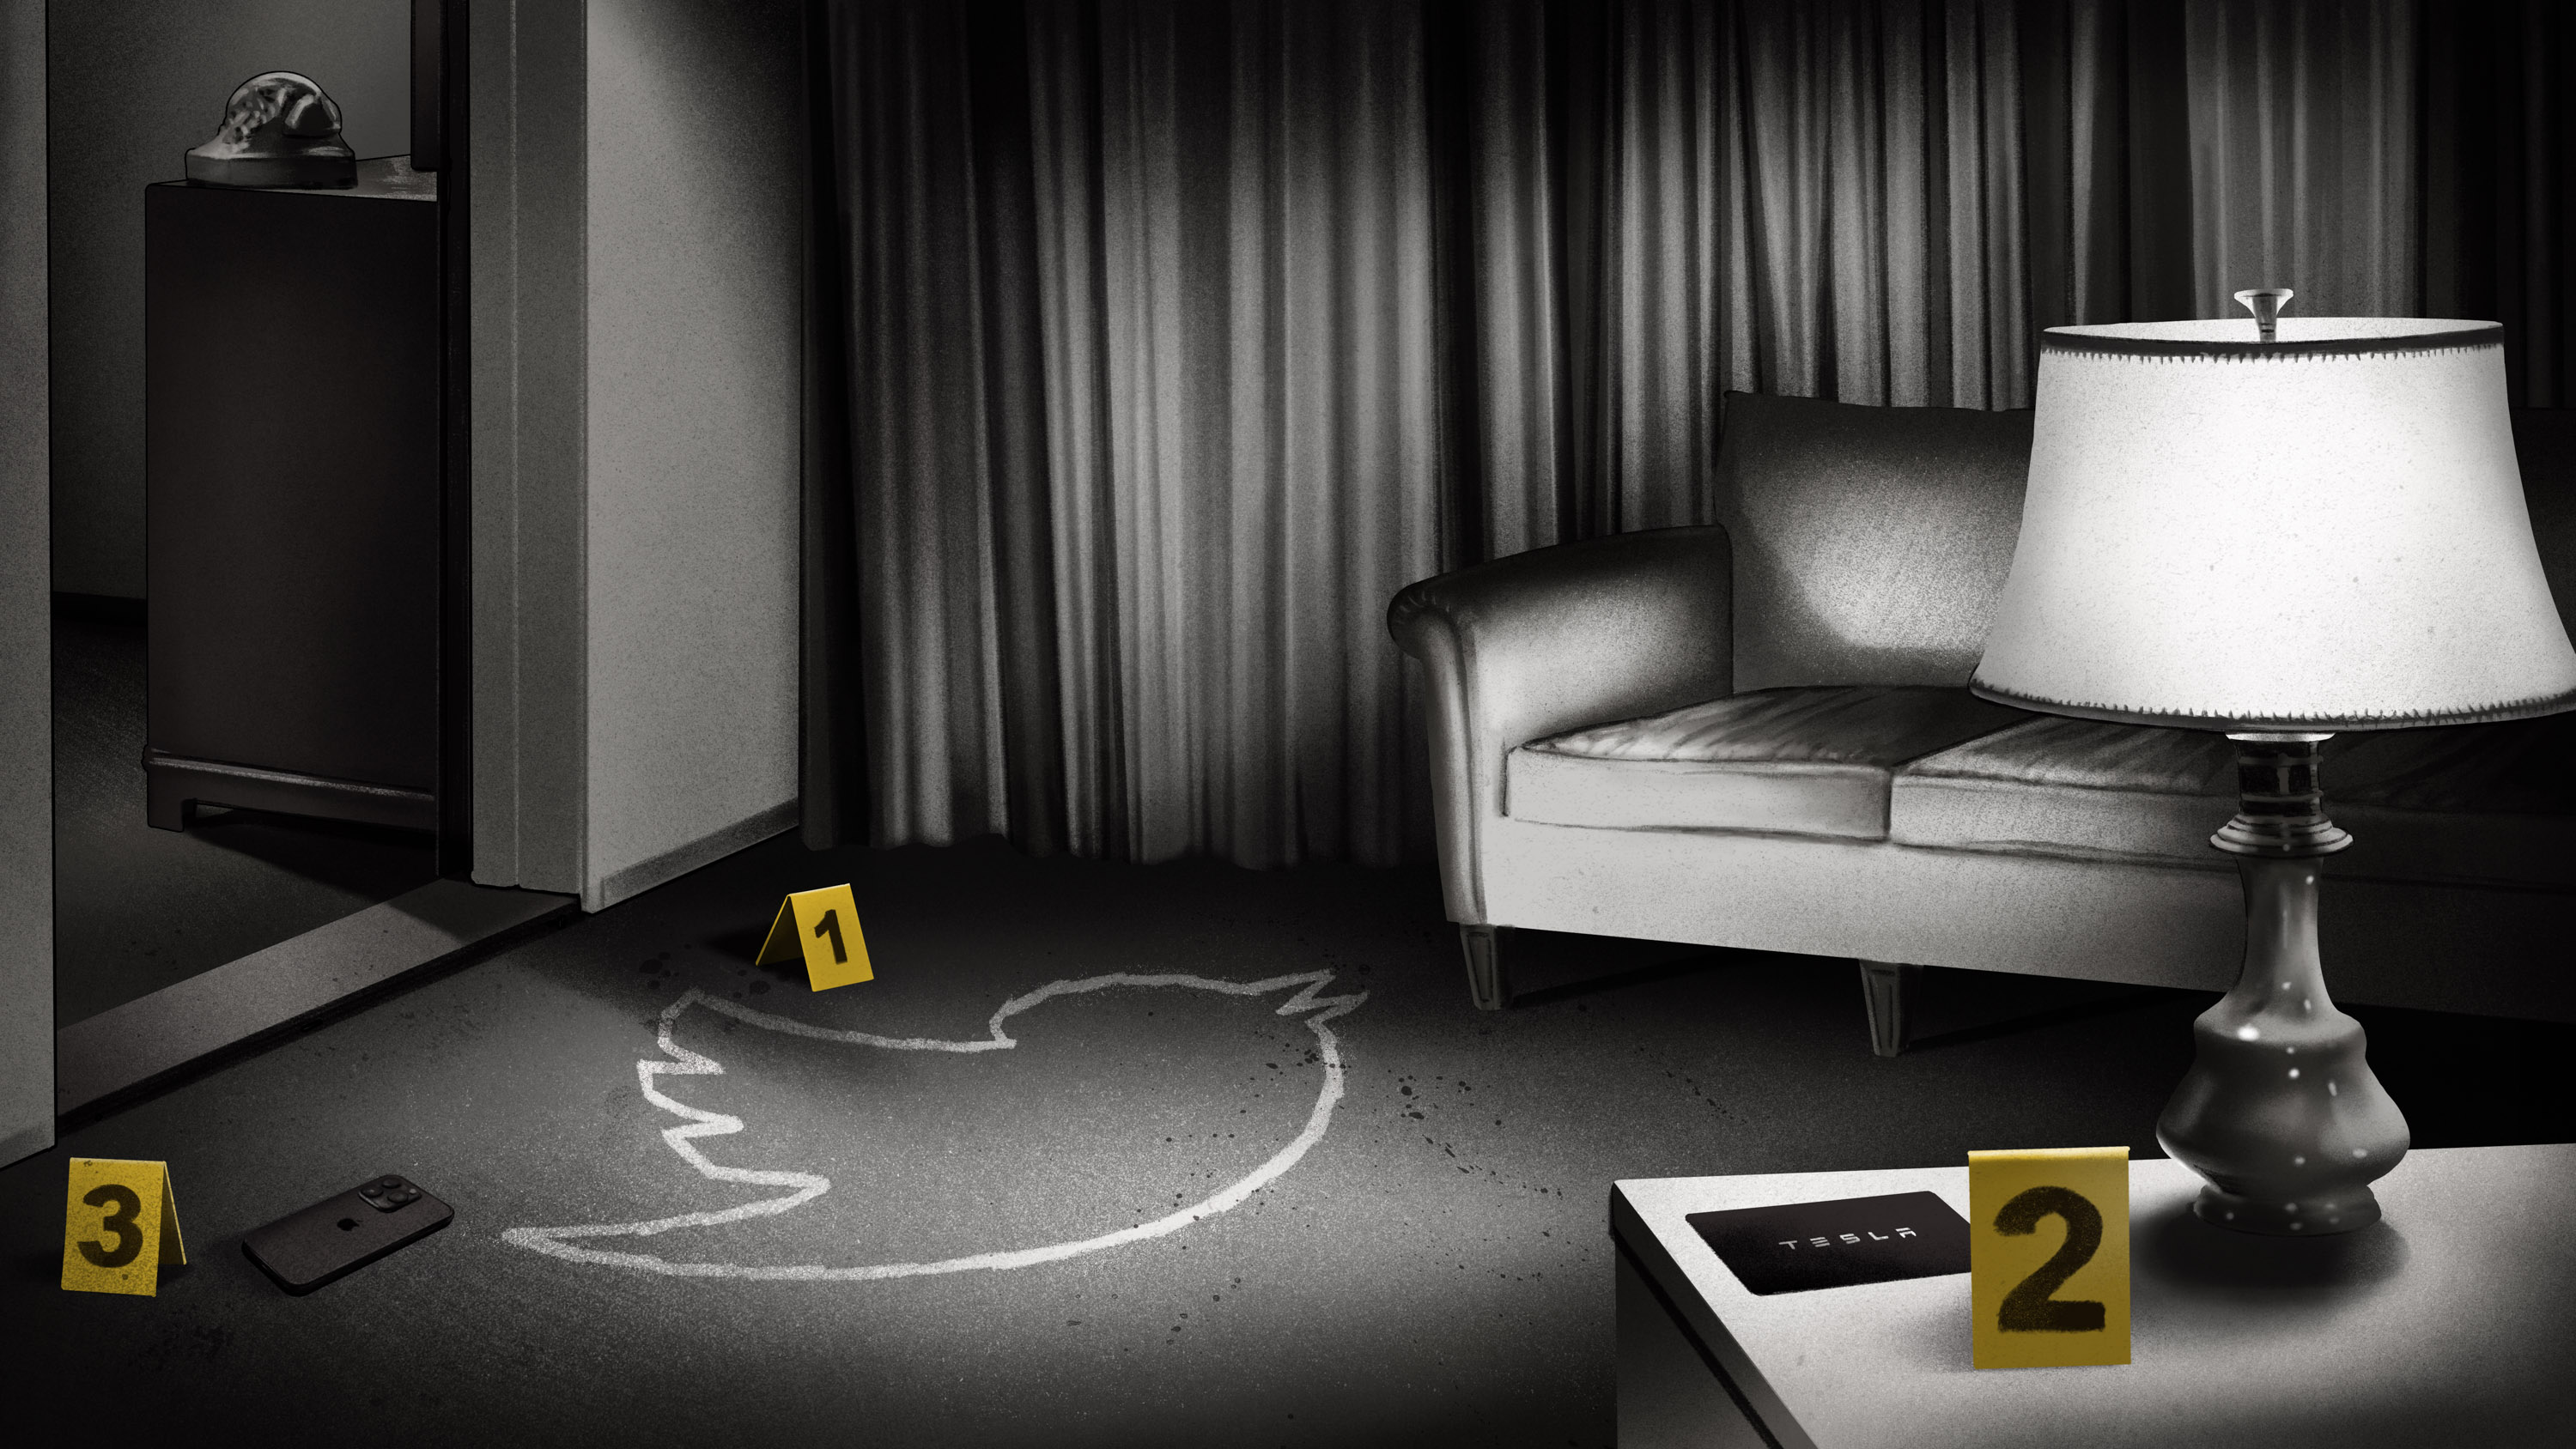 a hotel crime scene in in Hitchcock-era noir film lighting with a chalk outline of the twitter logo marked as exhibit 1. A tesla badge on the nightstand is marked 2 and a cell phone on the carpet is marked 3.